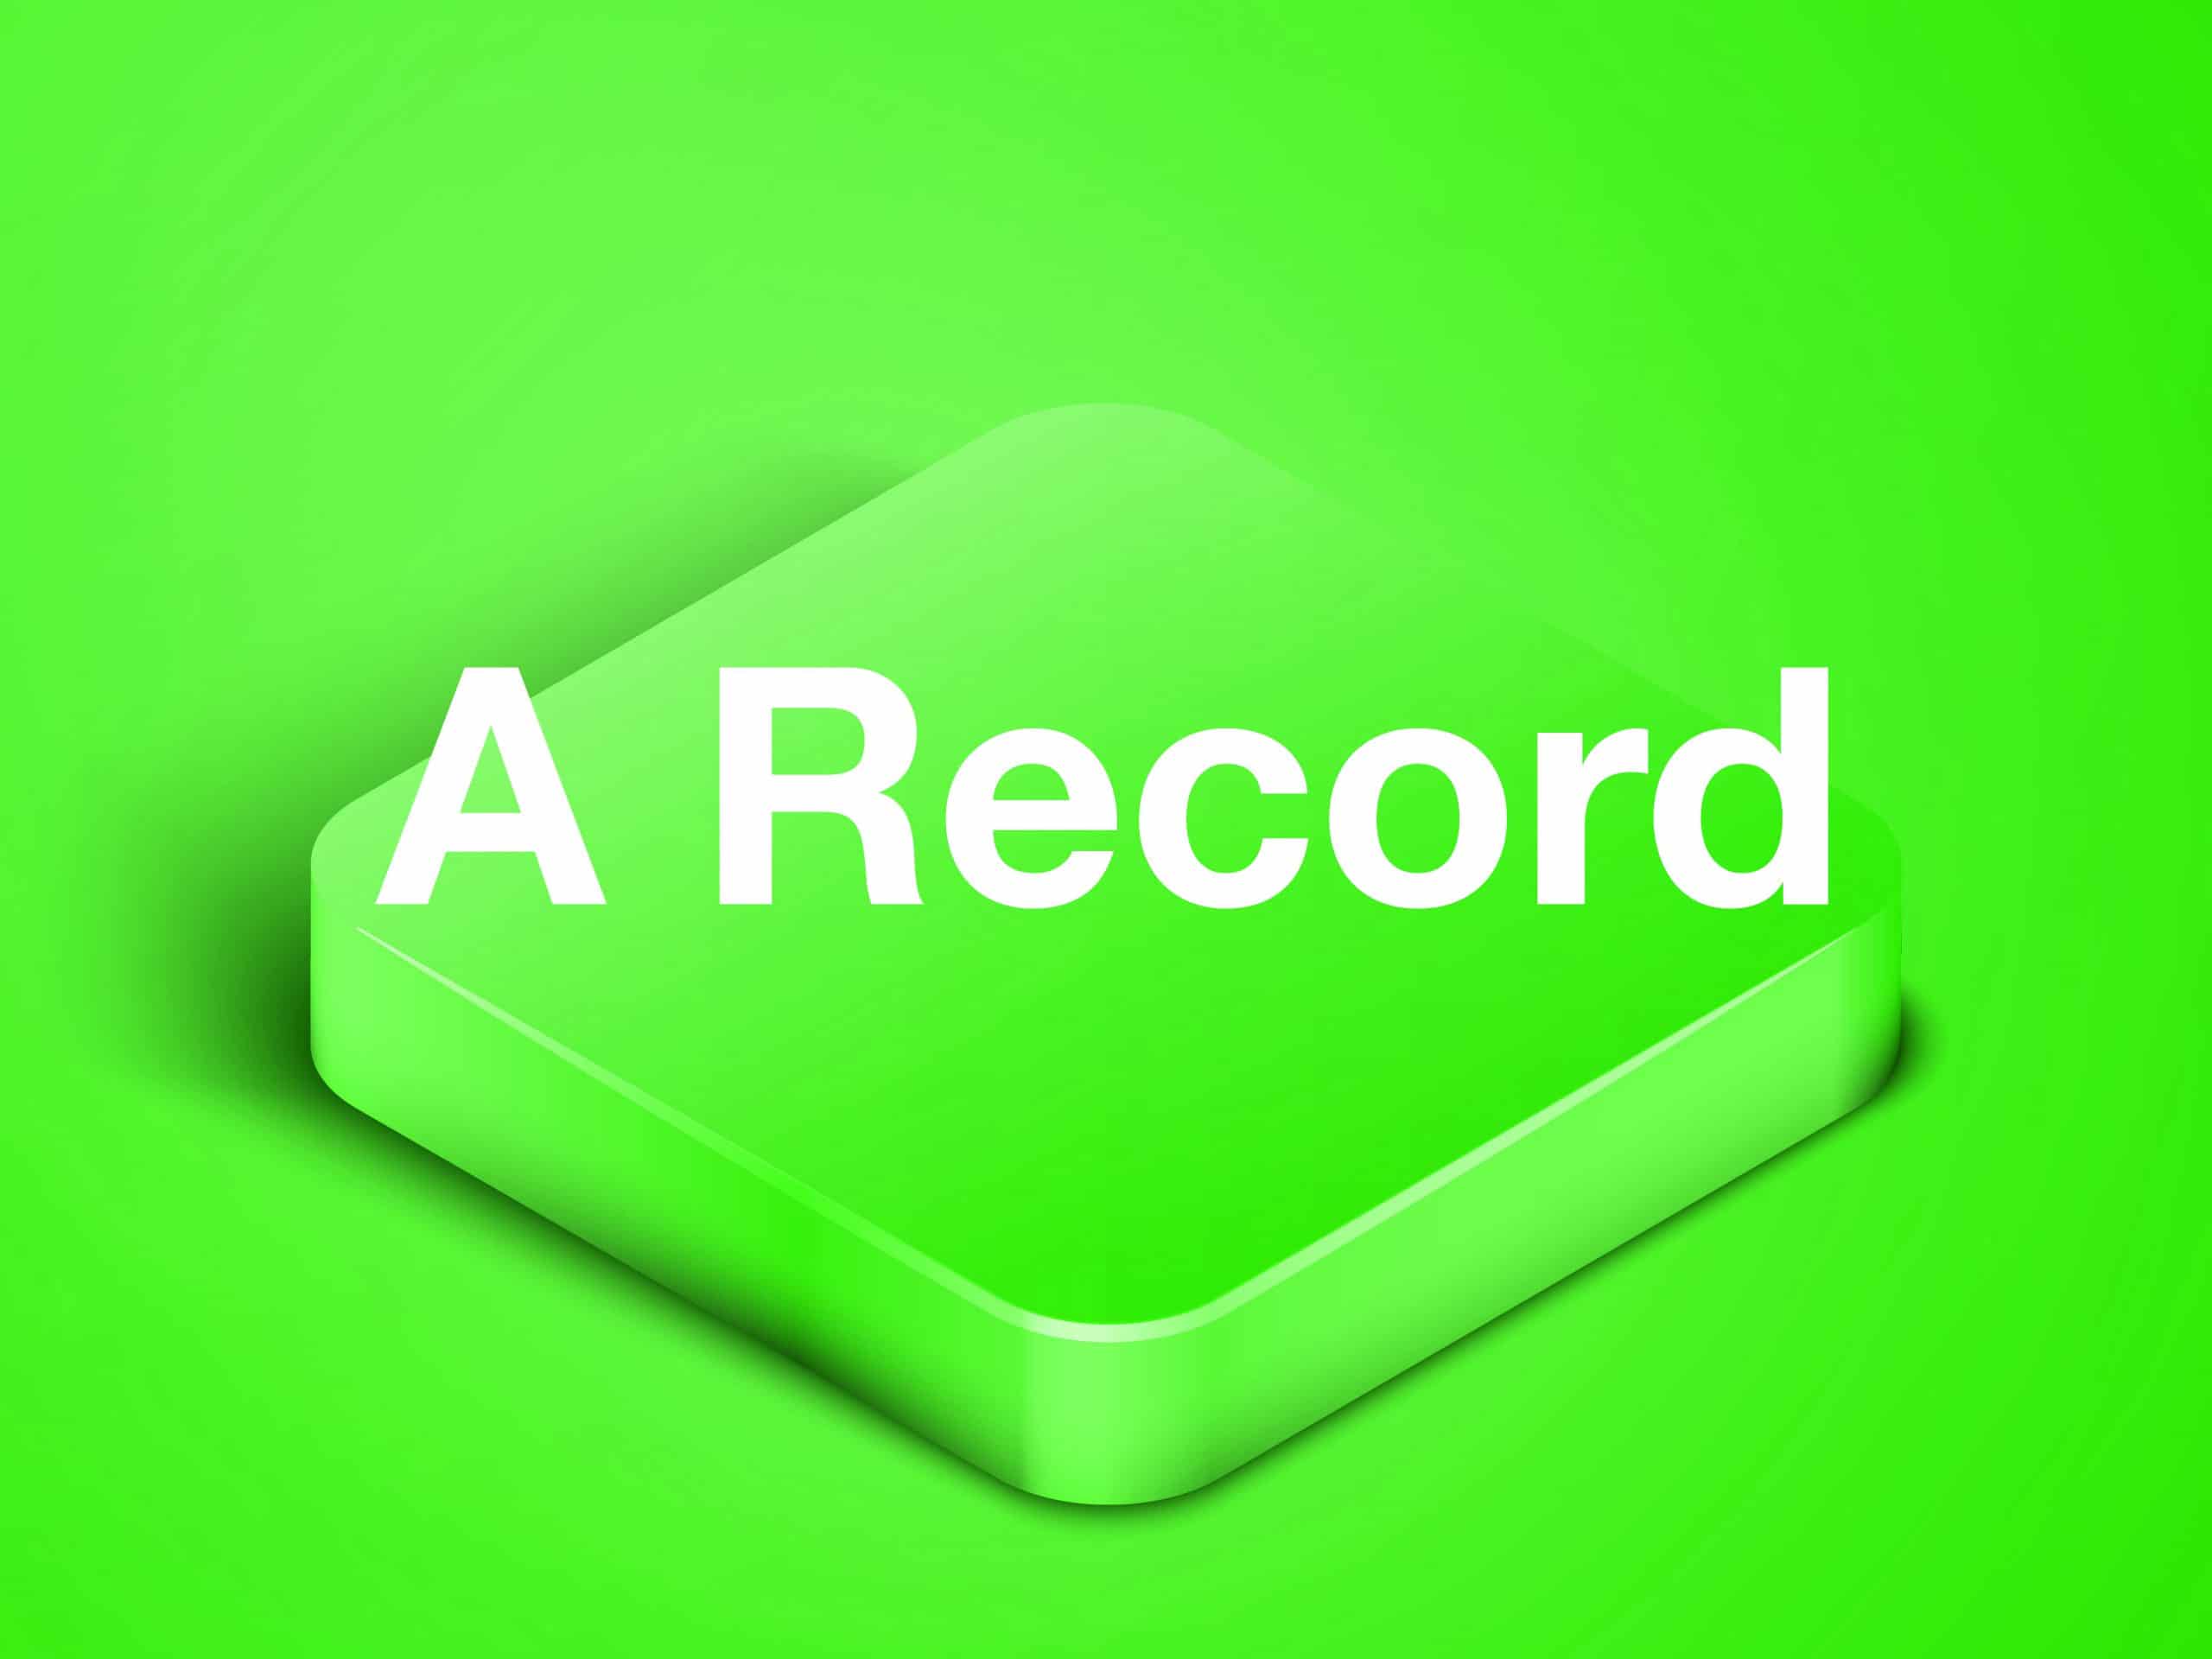 grade Cater episode What Is an A Record? - Domain Name Sanity Blog